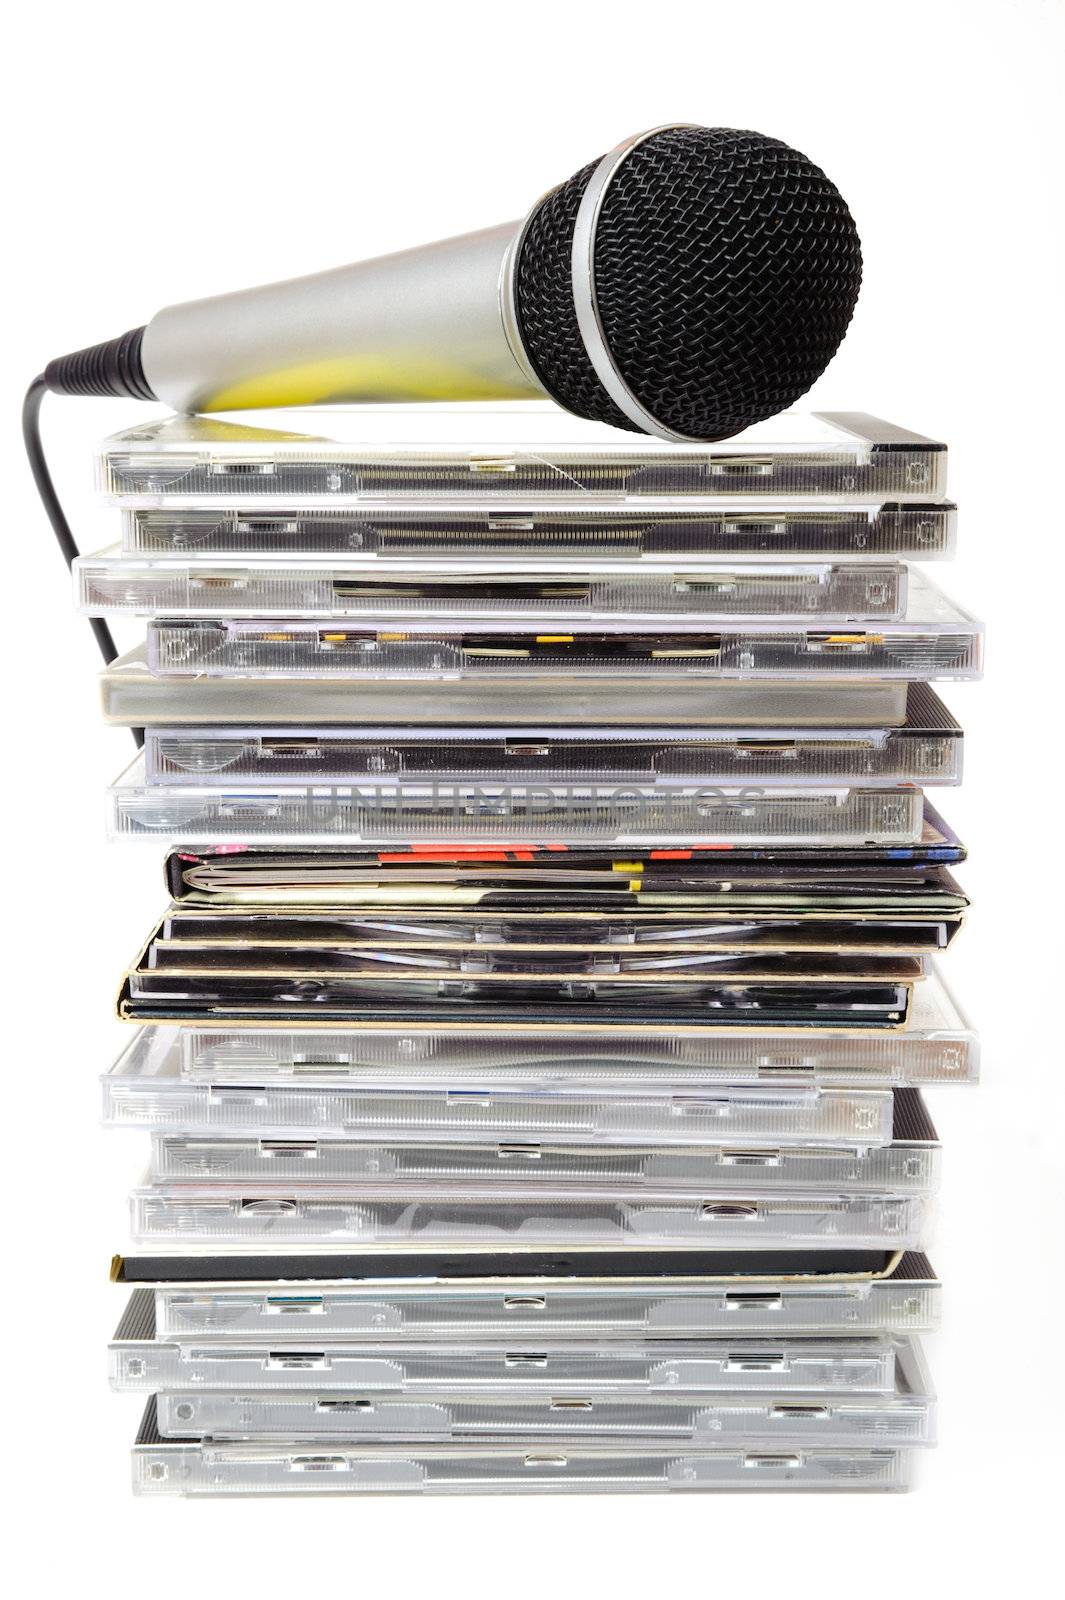 Microphone and karaoke compact discs collection by Viktorus